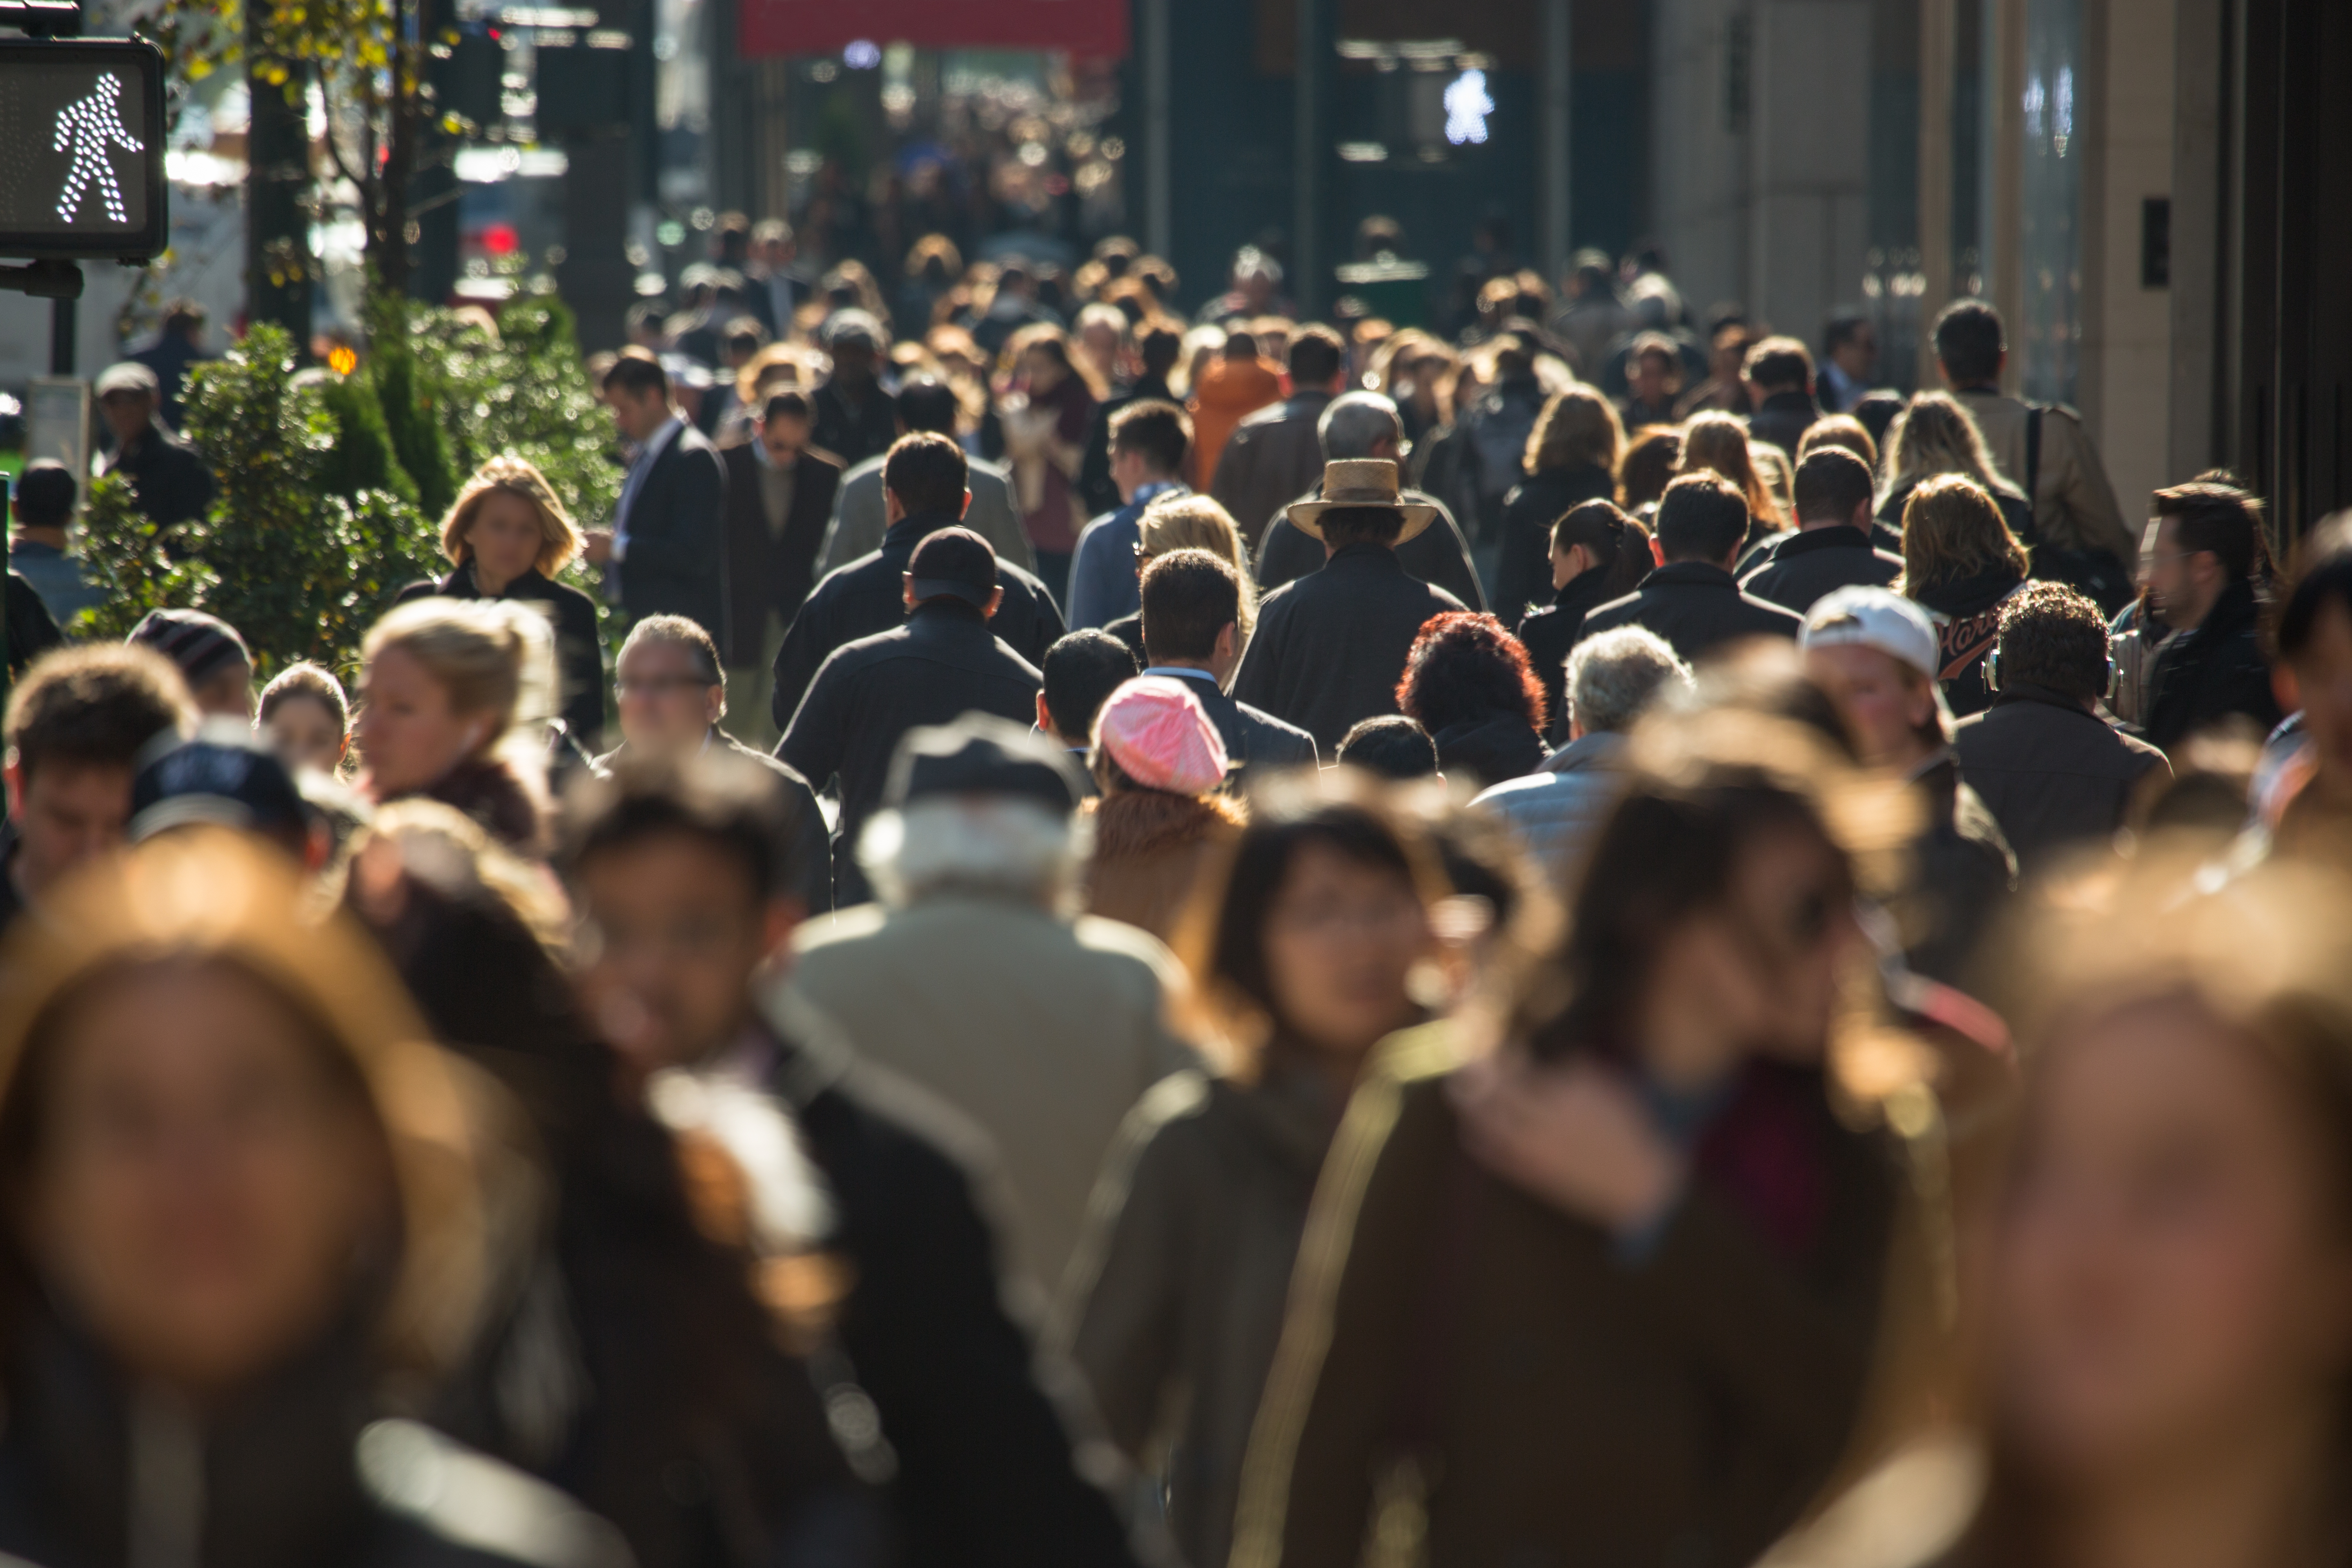 Crowd of anonymous people | Source: Shutterstock